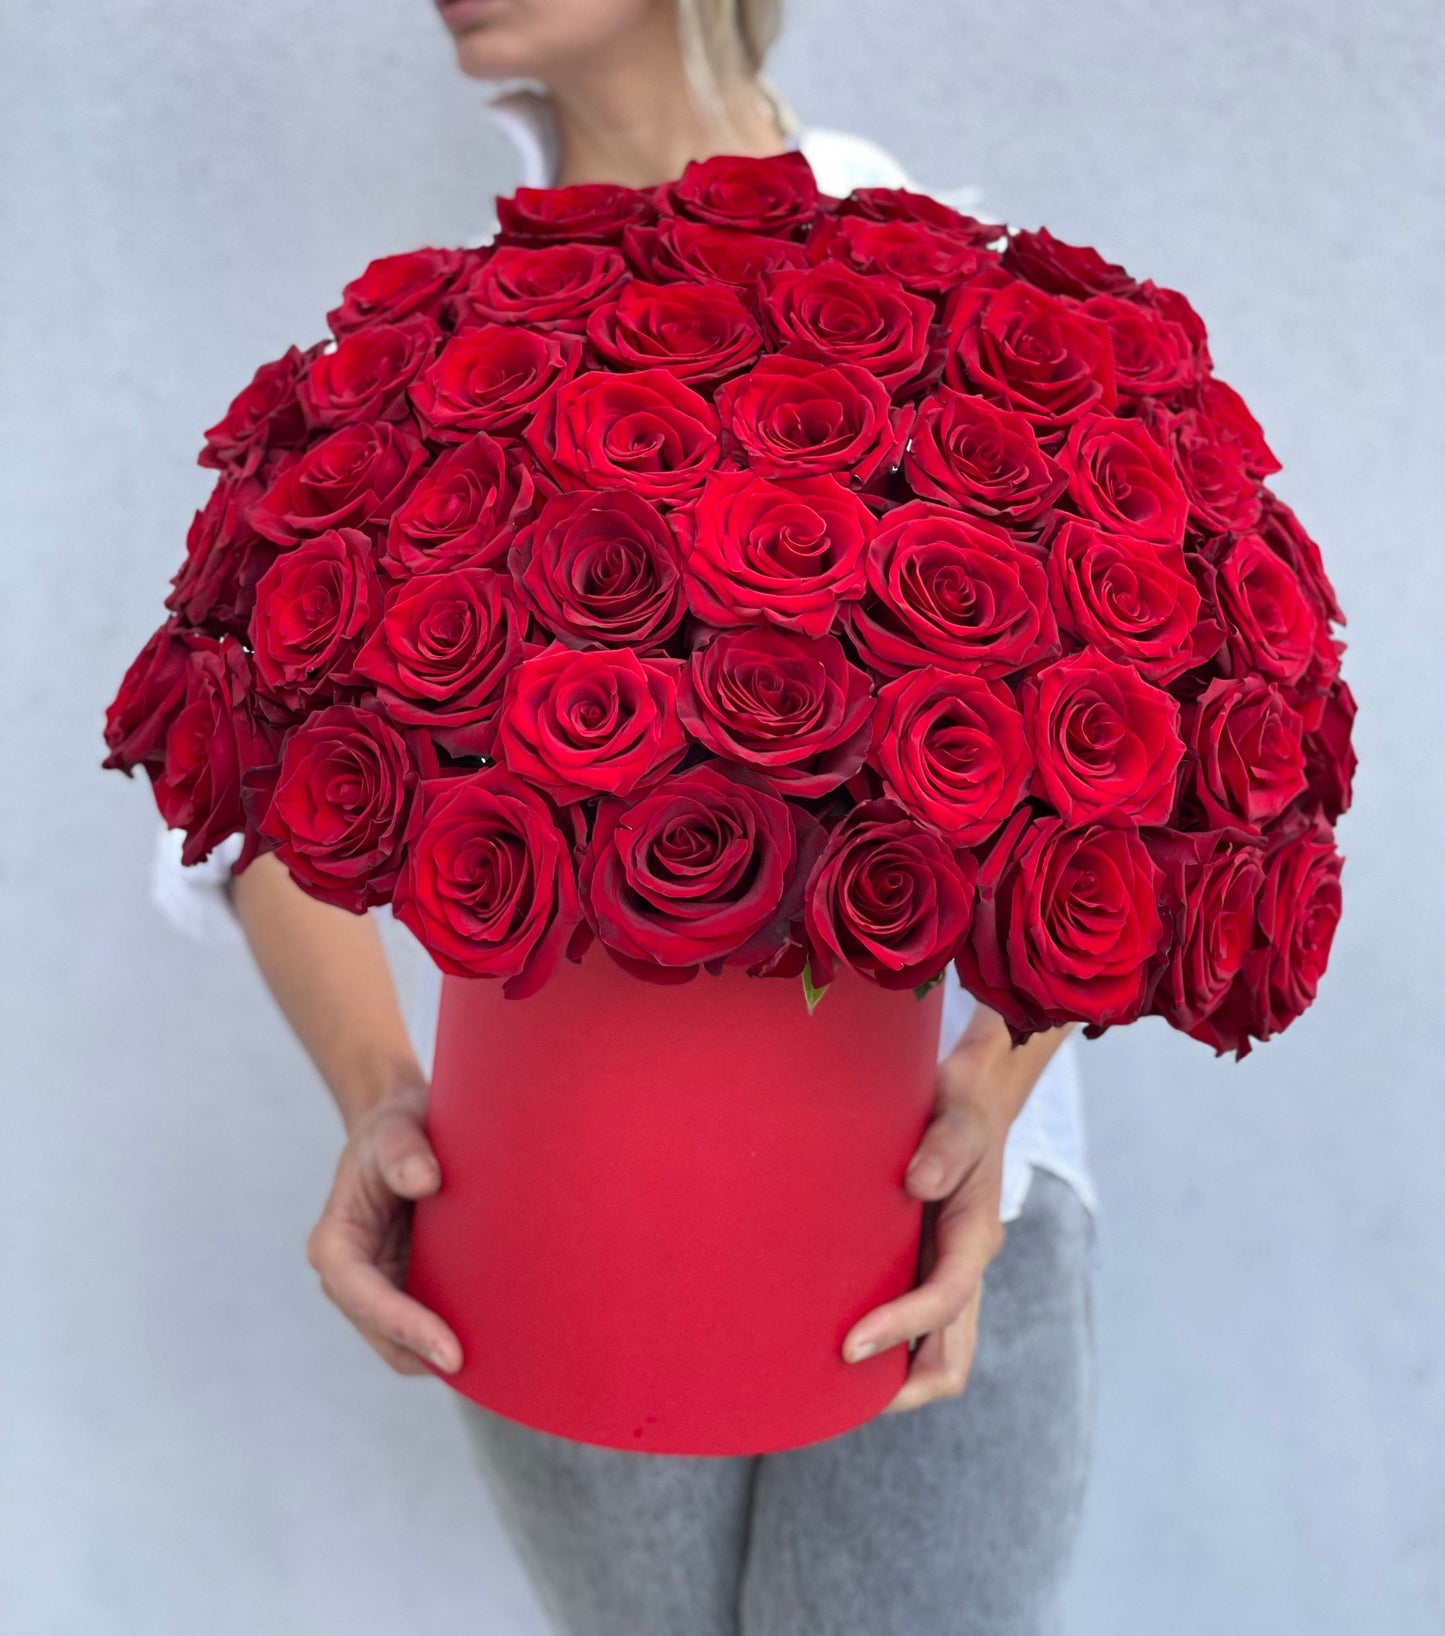 Box of 50 gorgeous red roses